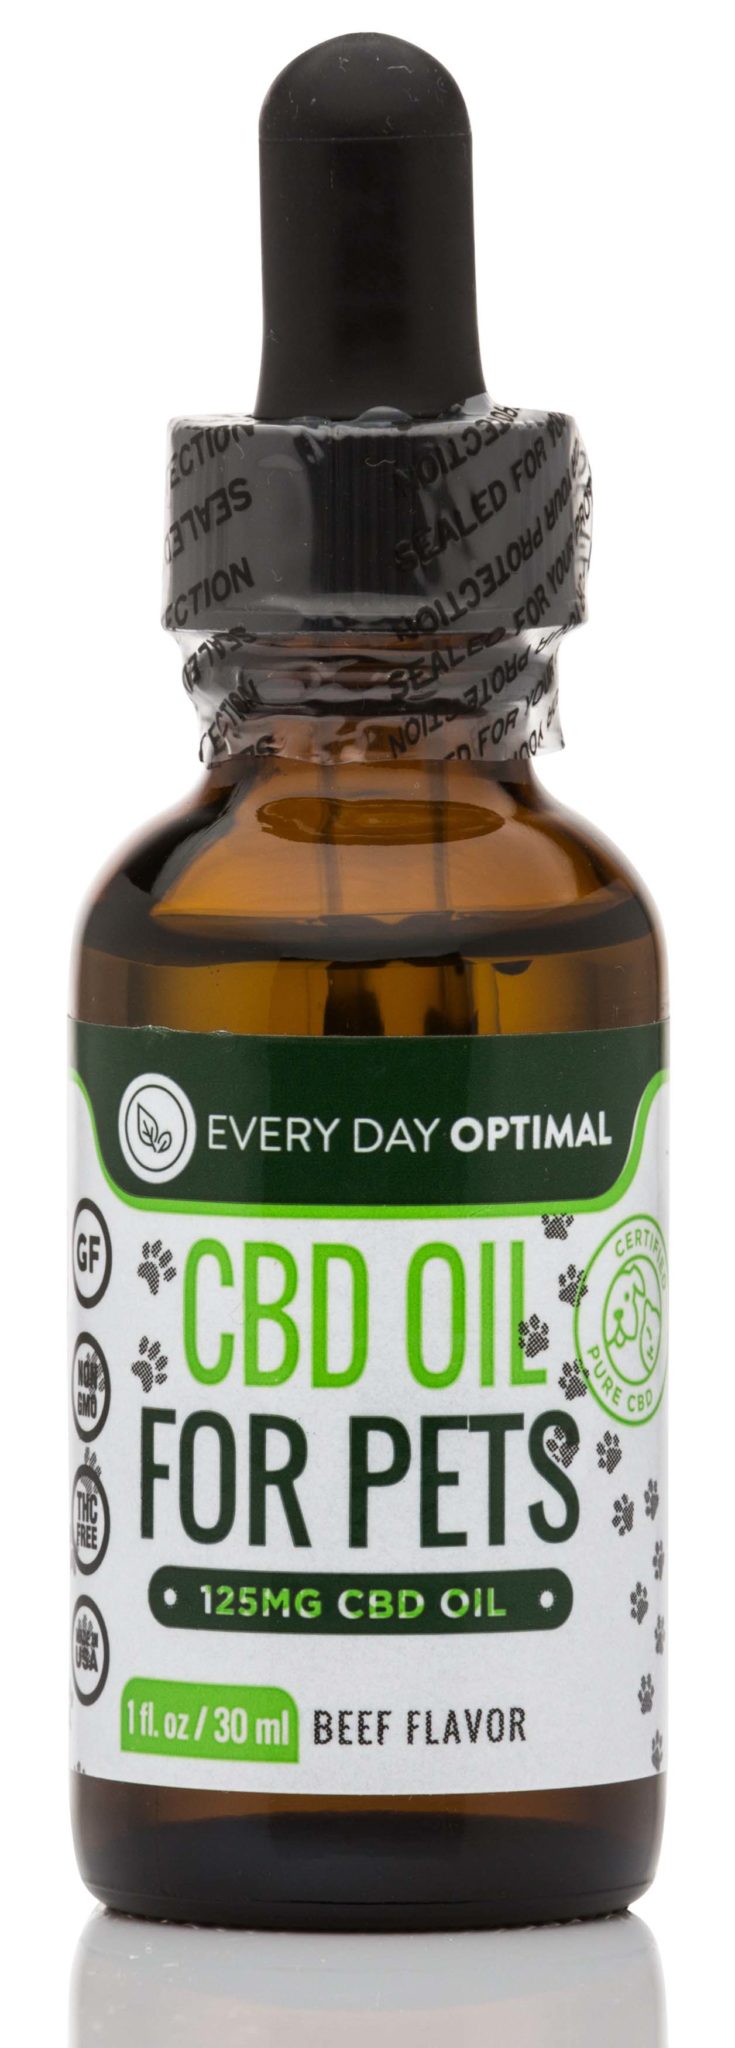 CBD Oil for Dogs 2022: Beef Flavored